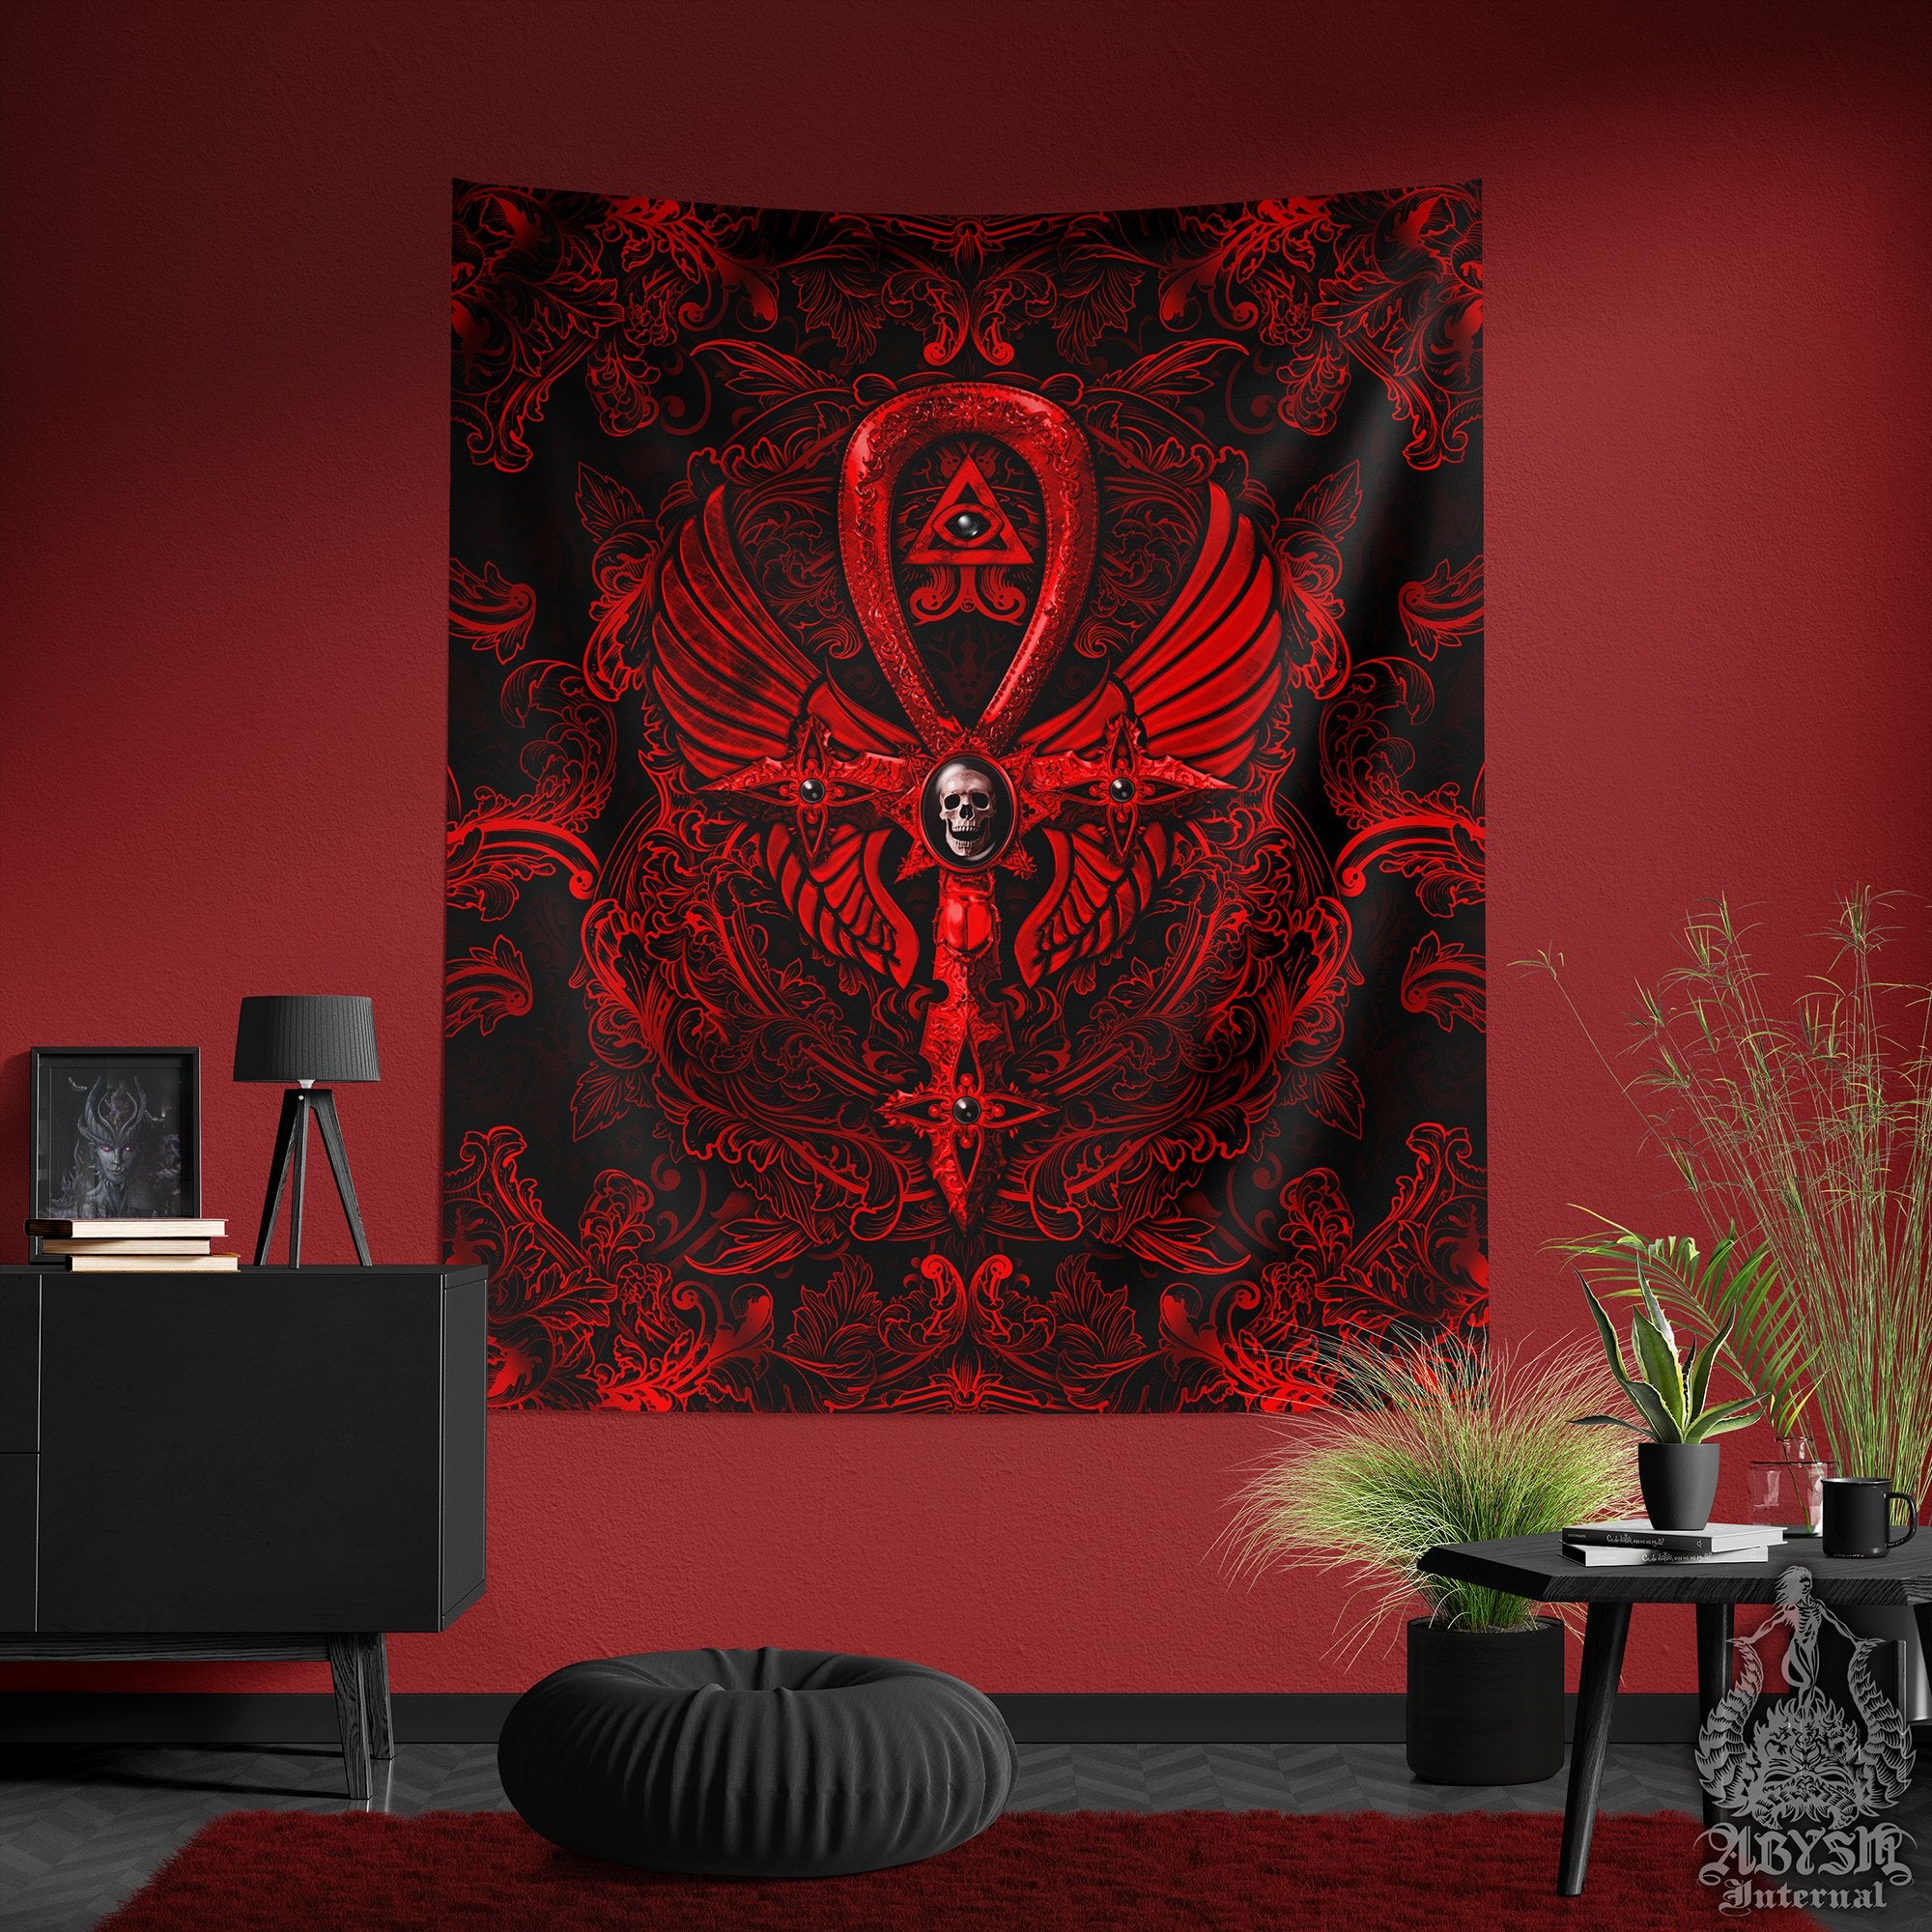 Bloody Gothic Tapestry, Goth Cross Wall Hanging, Occult Home Decor, Vertical Art Print - Dark Ankh, Black, Red, Gold, 3 Colors - Abysm Internal